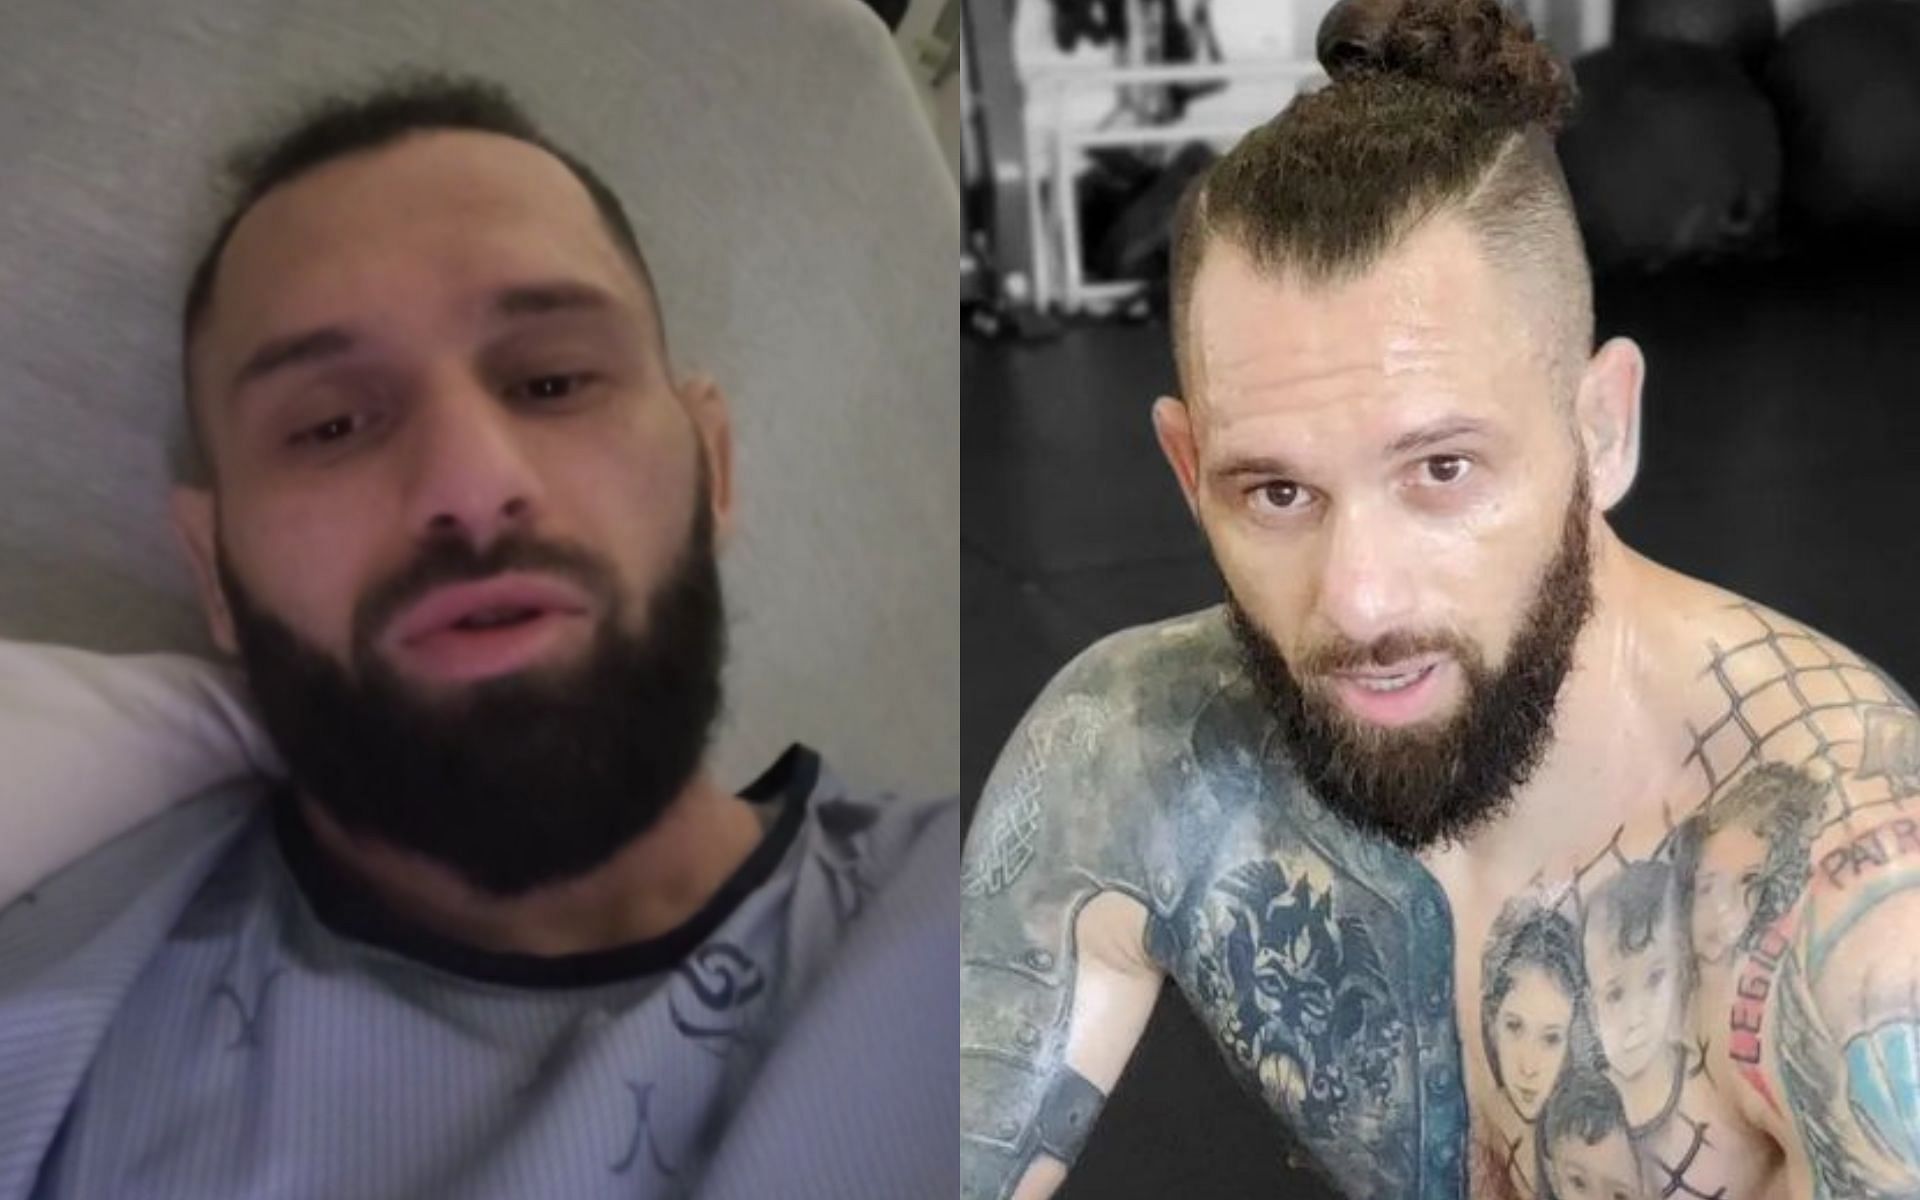 Samourai MMA fighter Robert Seres before and after being hospitalized for kidney faliure [Image courtesy @robertseres_mma on Instagram]